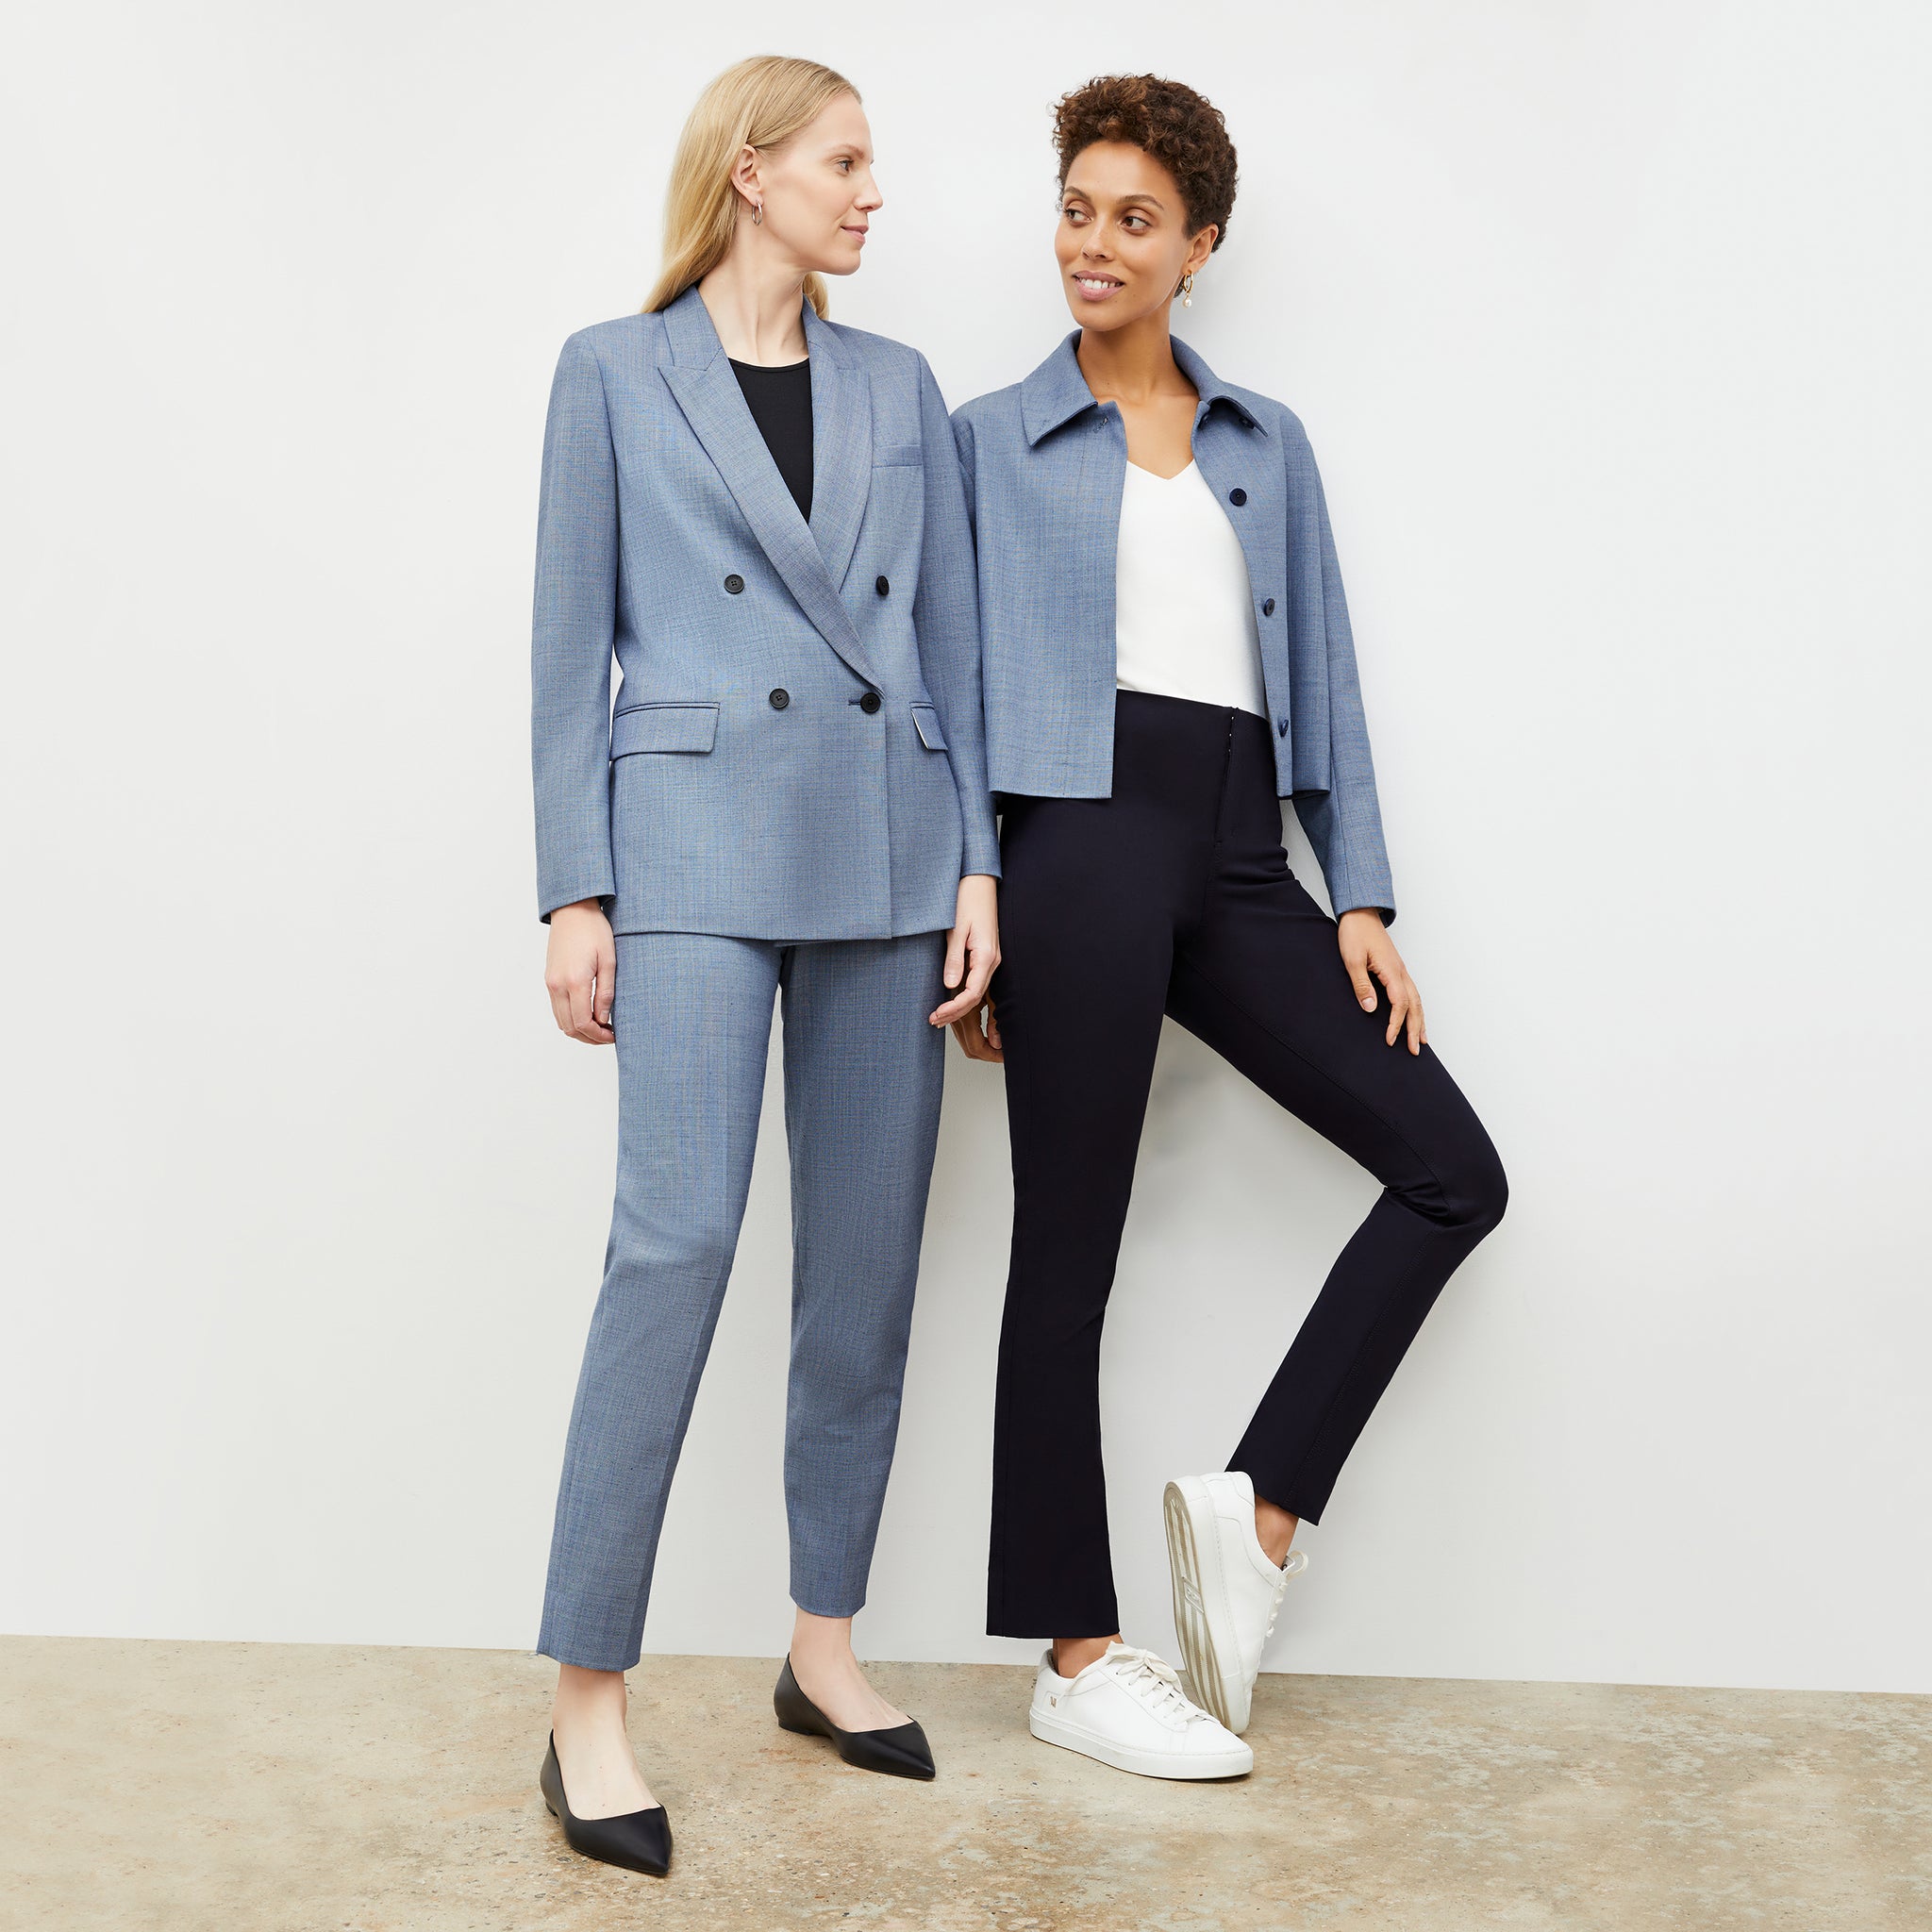 Front image of a woman wearing the mejia pant in indigo and white standing with another woman